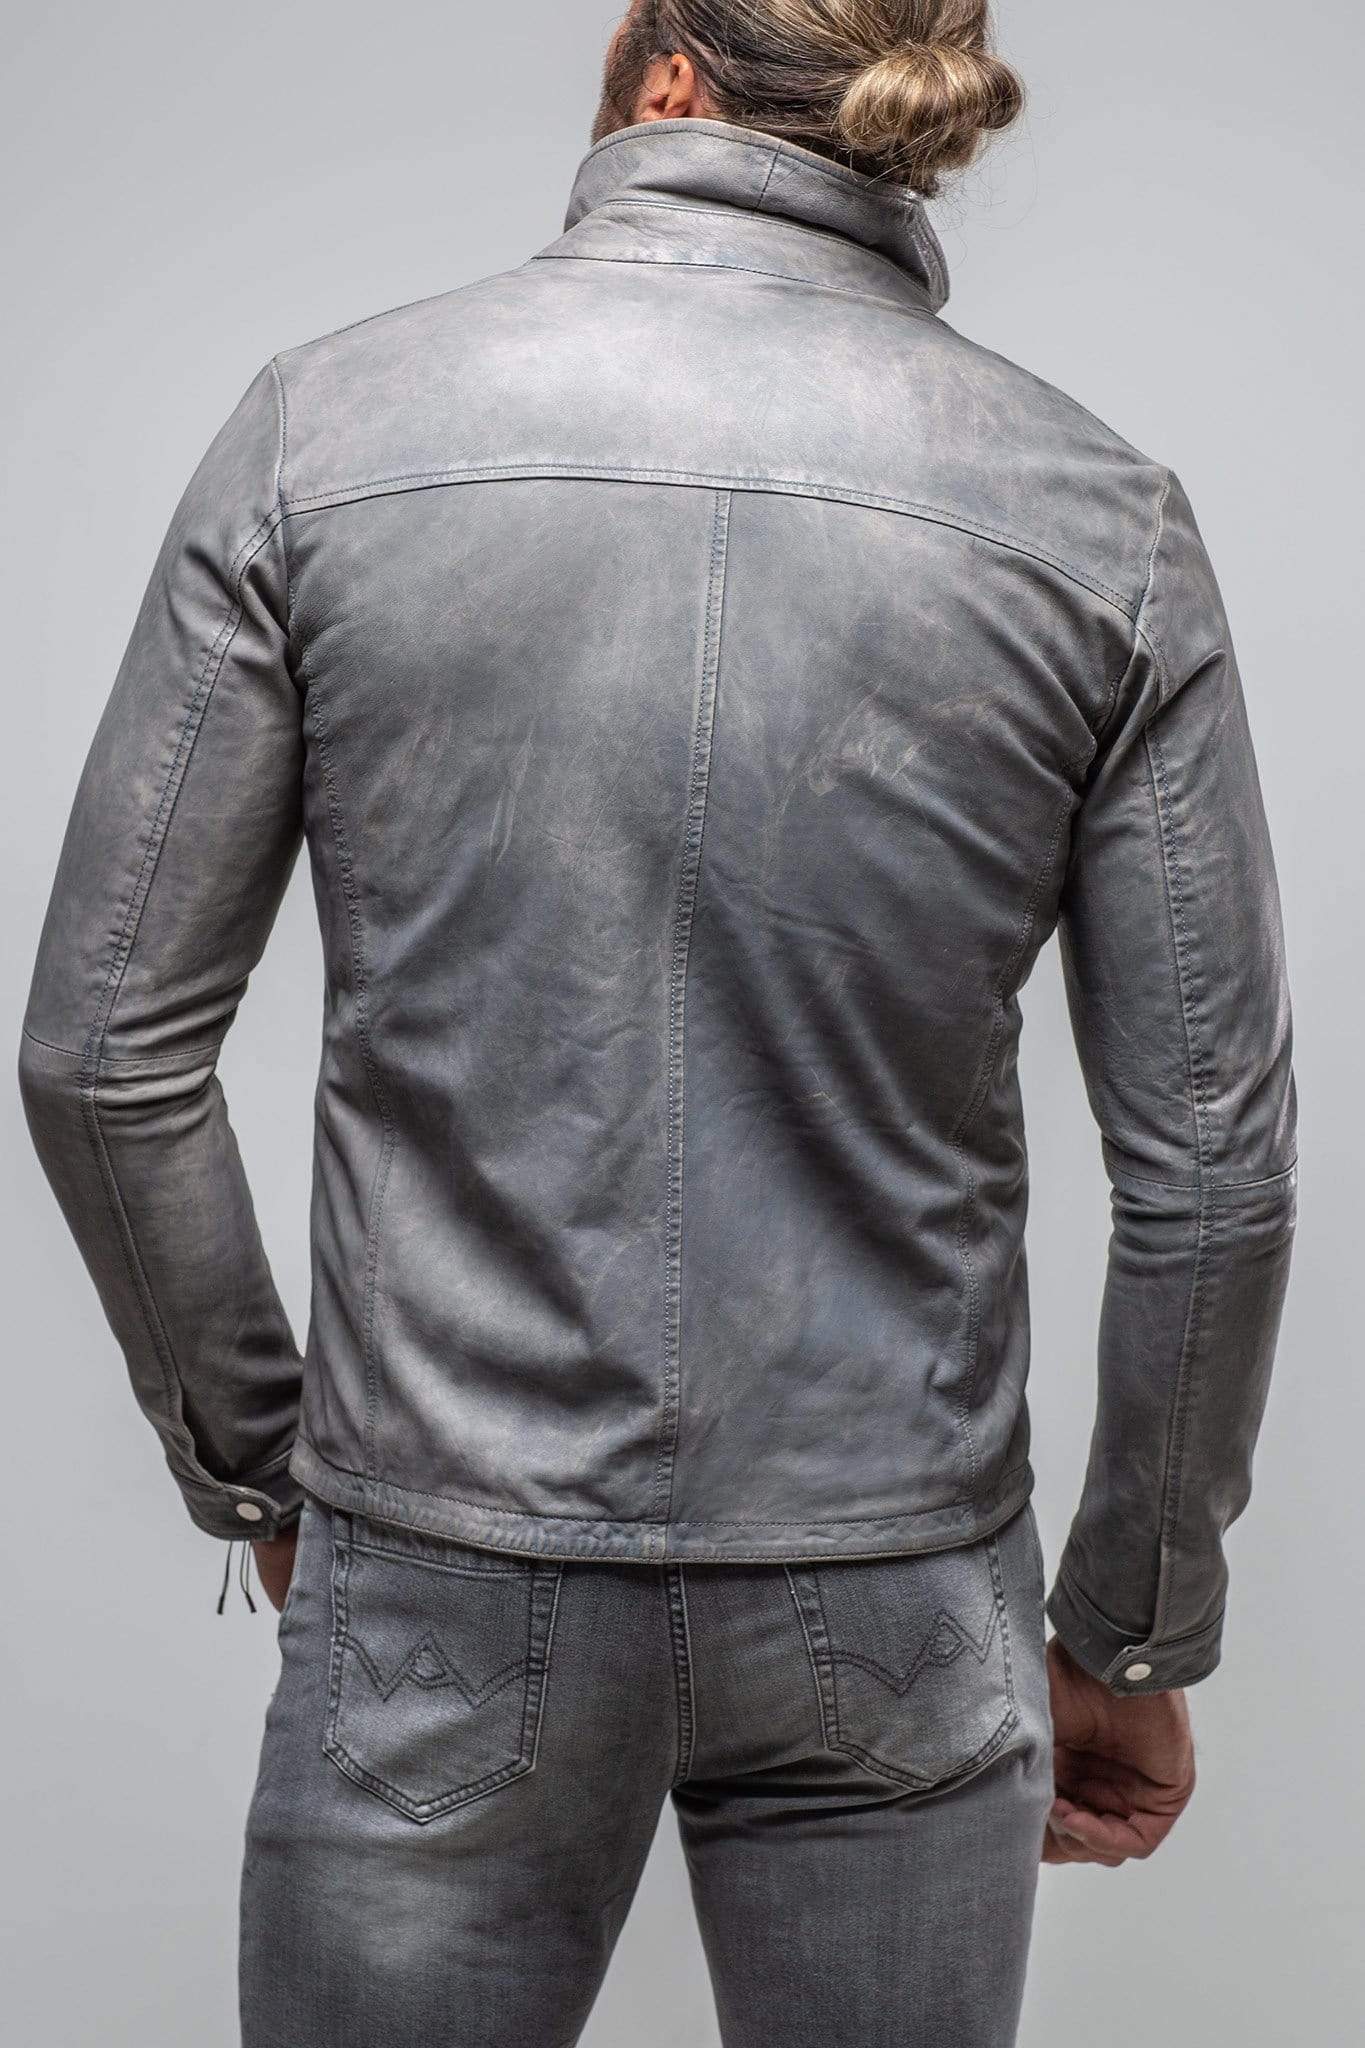 Welgos Leather Jacket in Grey - AXEL'S